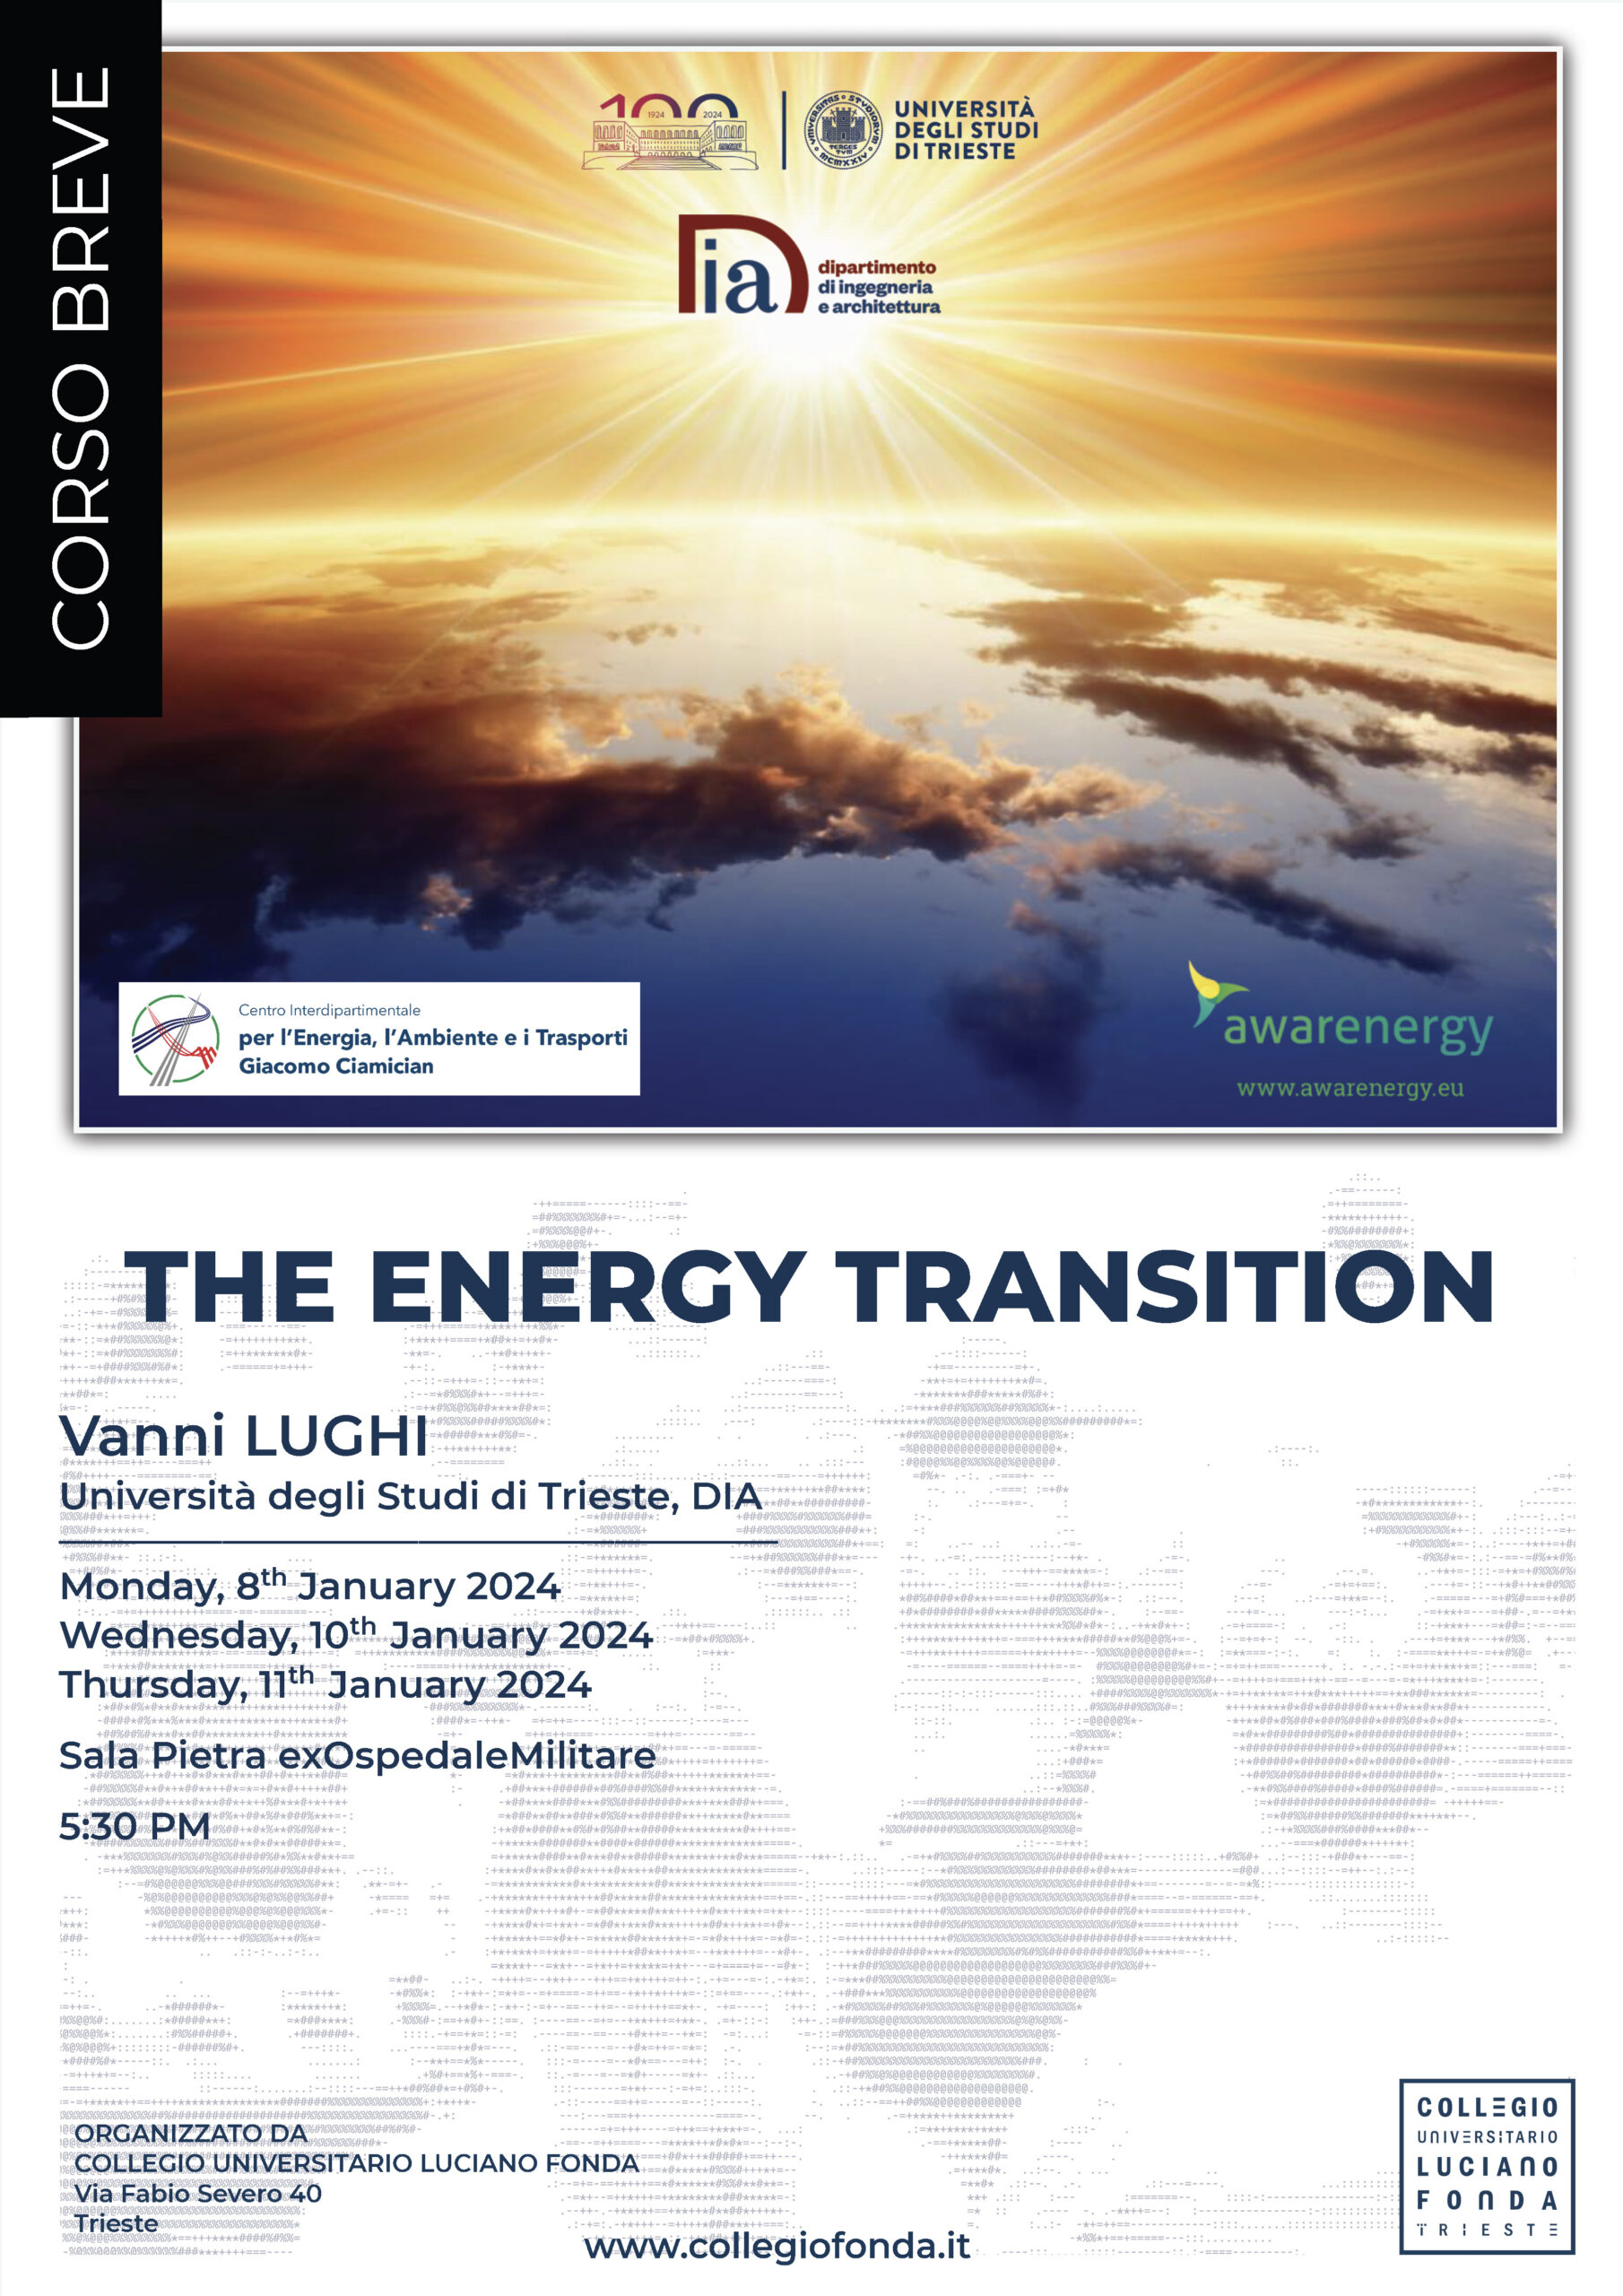 THE ENERGY TRANSITION • Short Course by Vanni Lughi – Starting on Monday, 8th January 2024